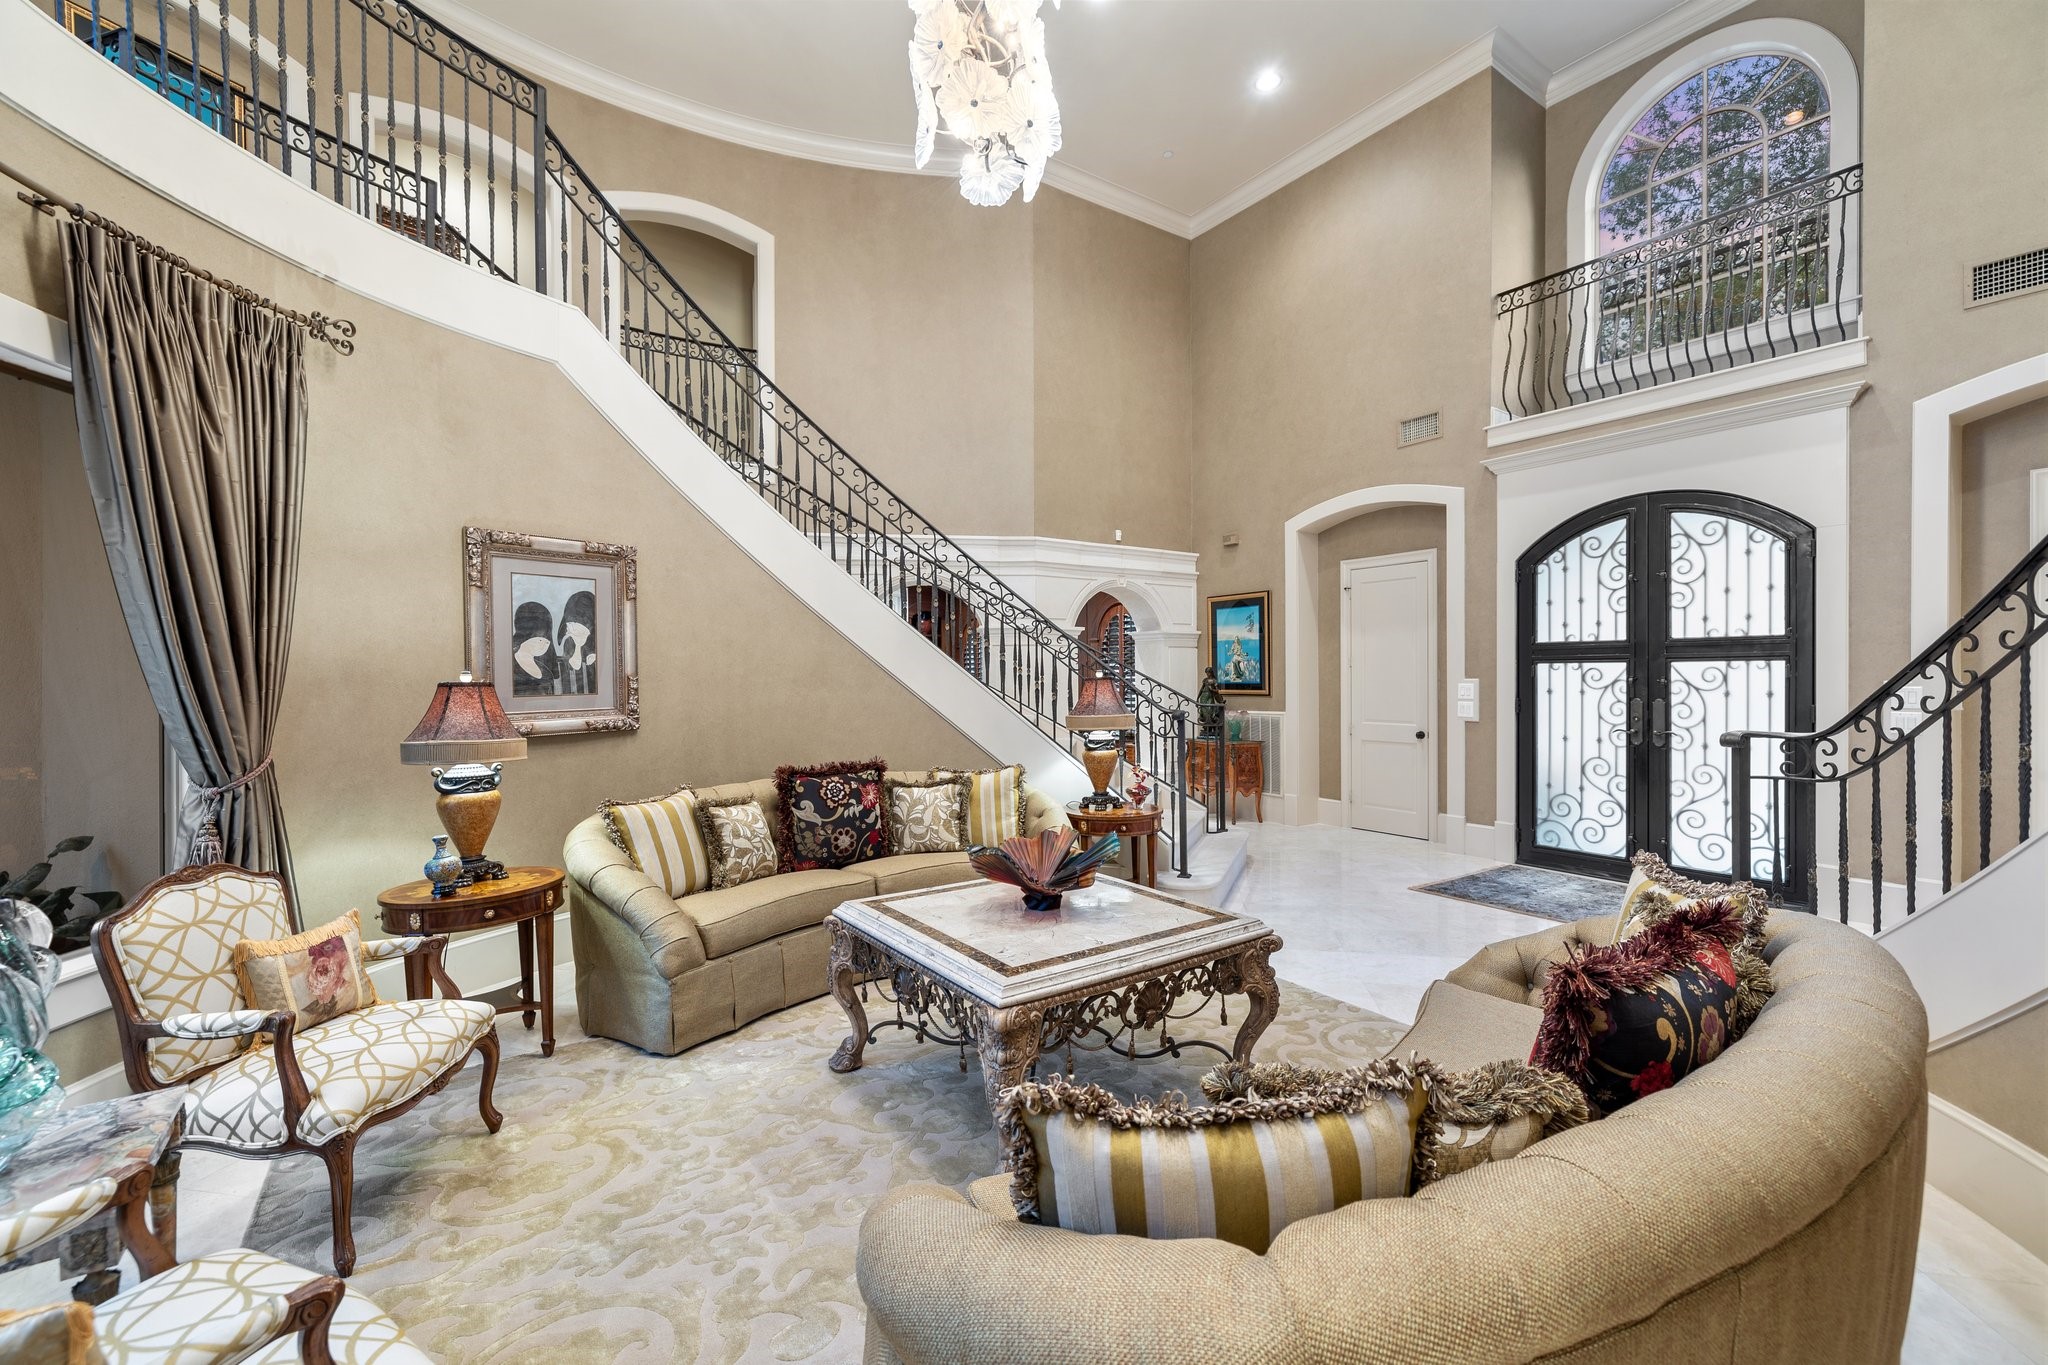 Enjoy the luxurious formal living room with grand windows and marble floors.